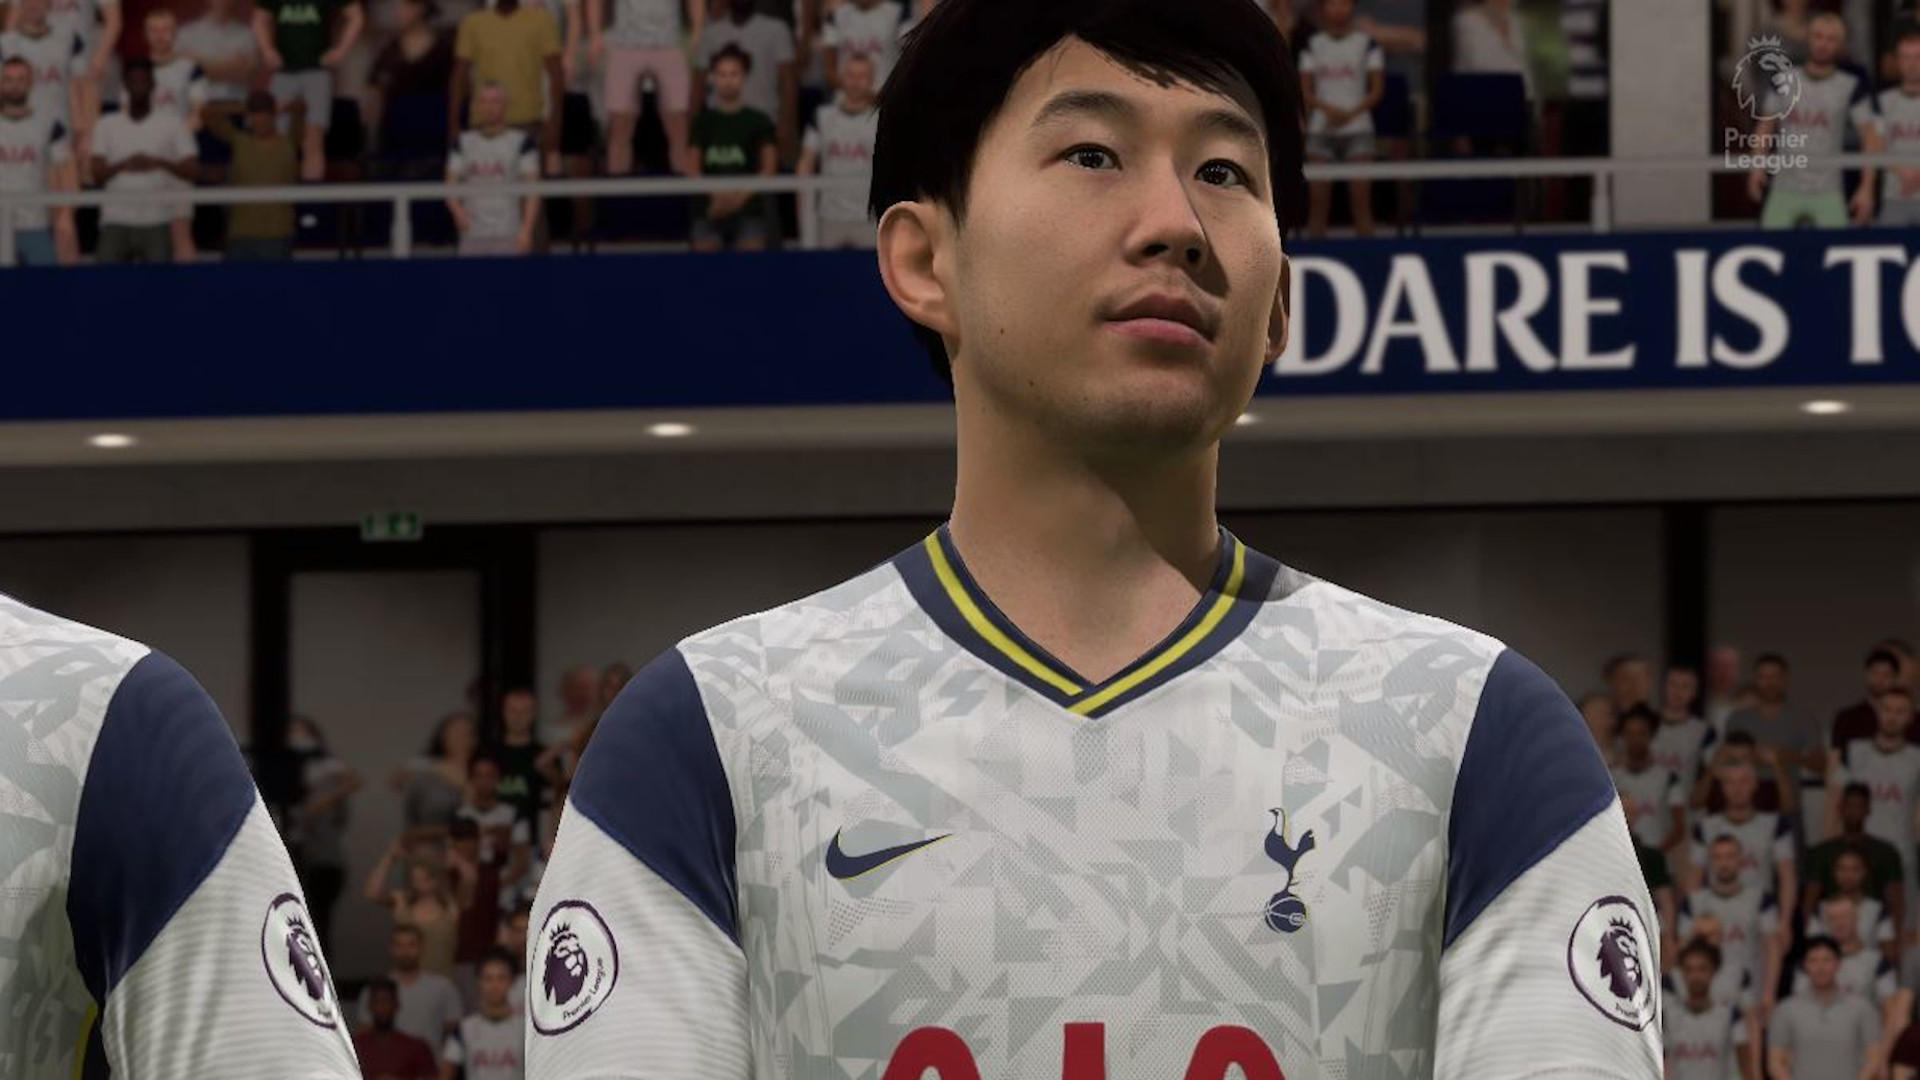 FIFA 21 POTM Son SBC: How to solve and which players to use | The Loadout